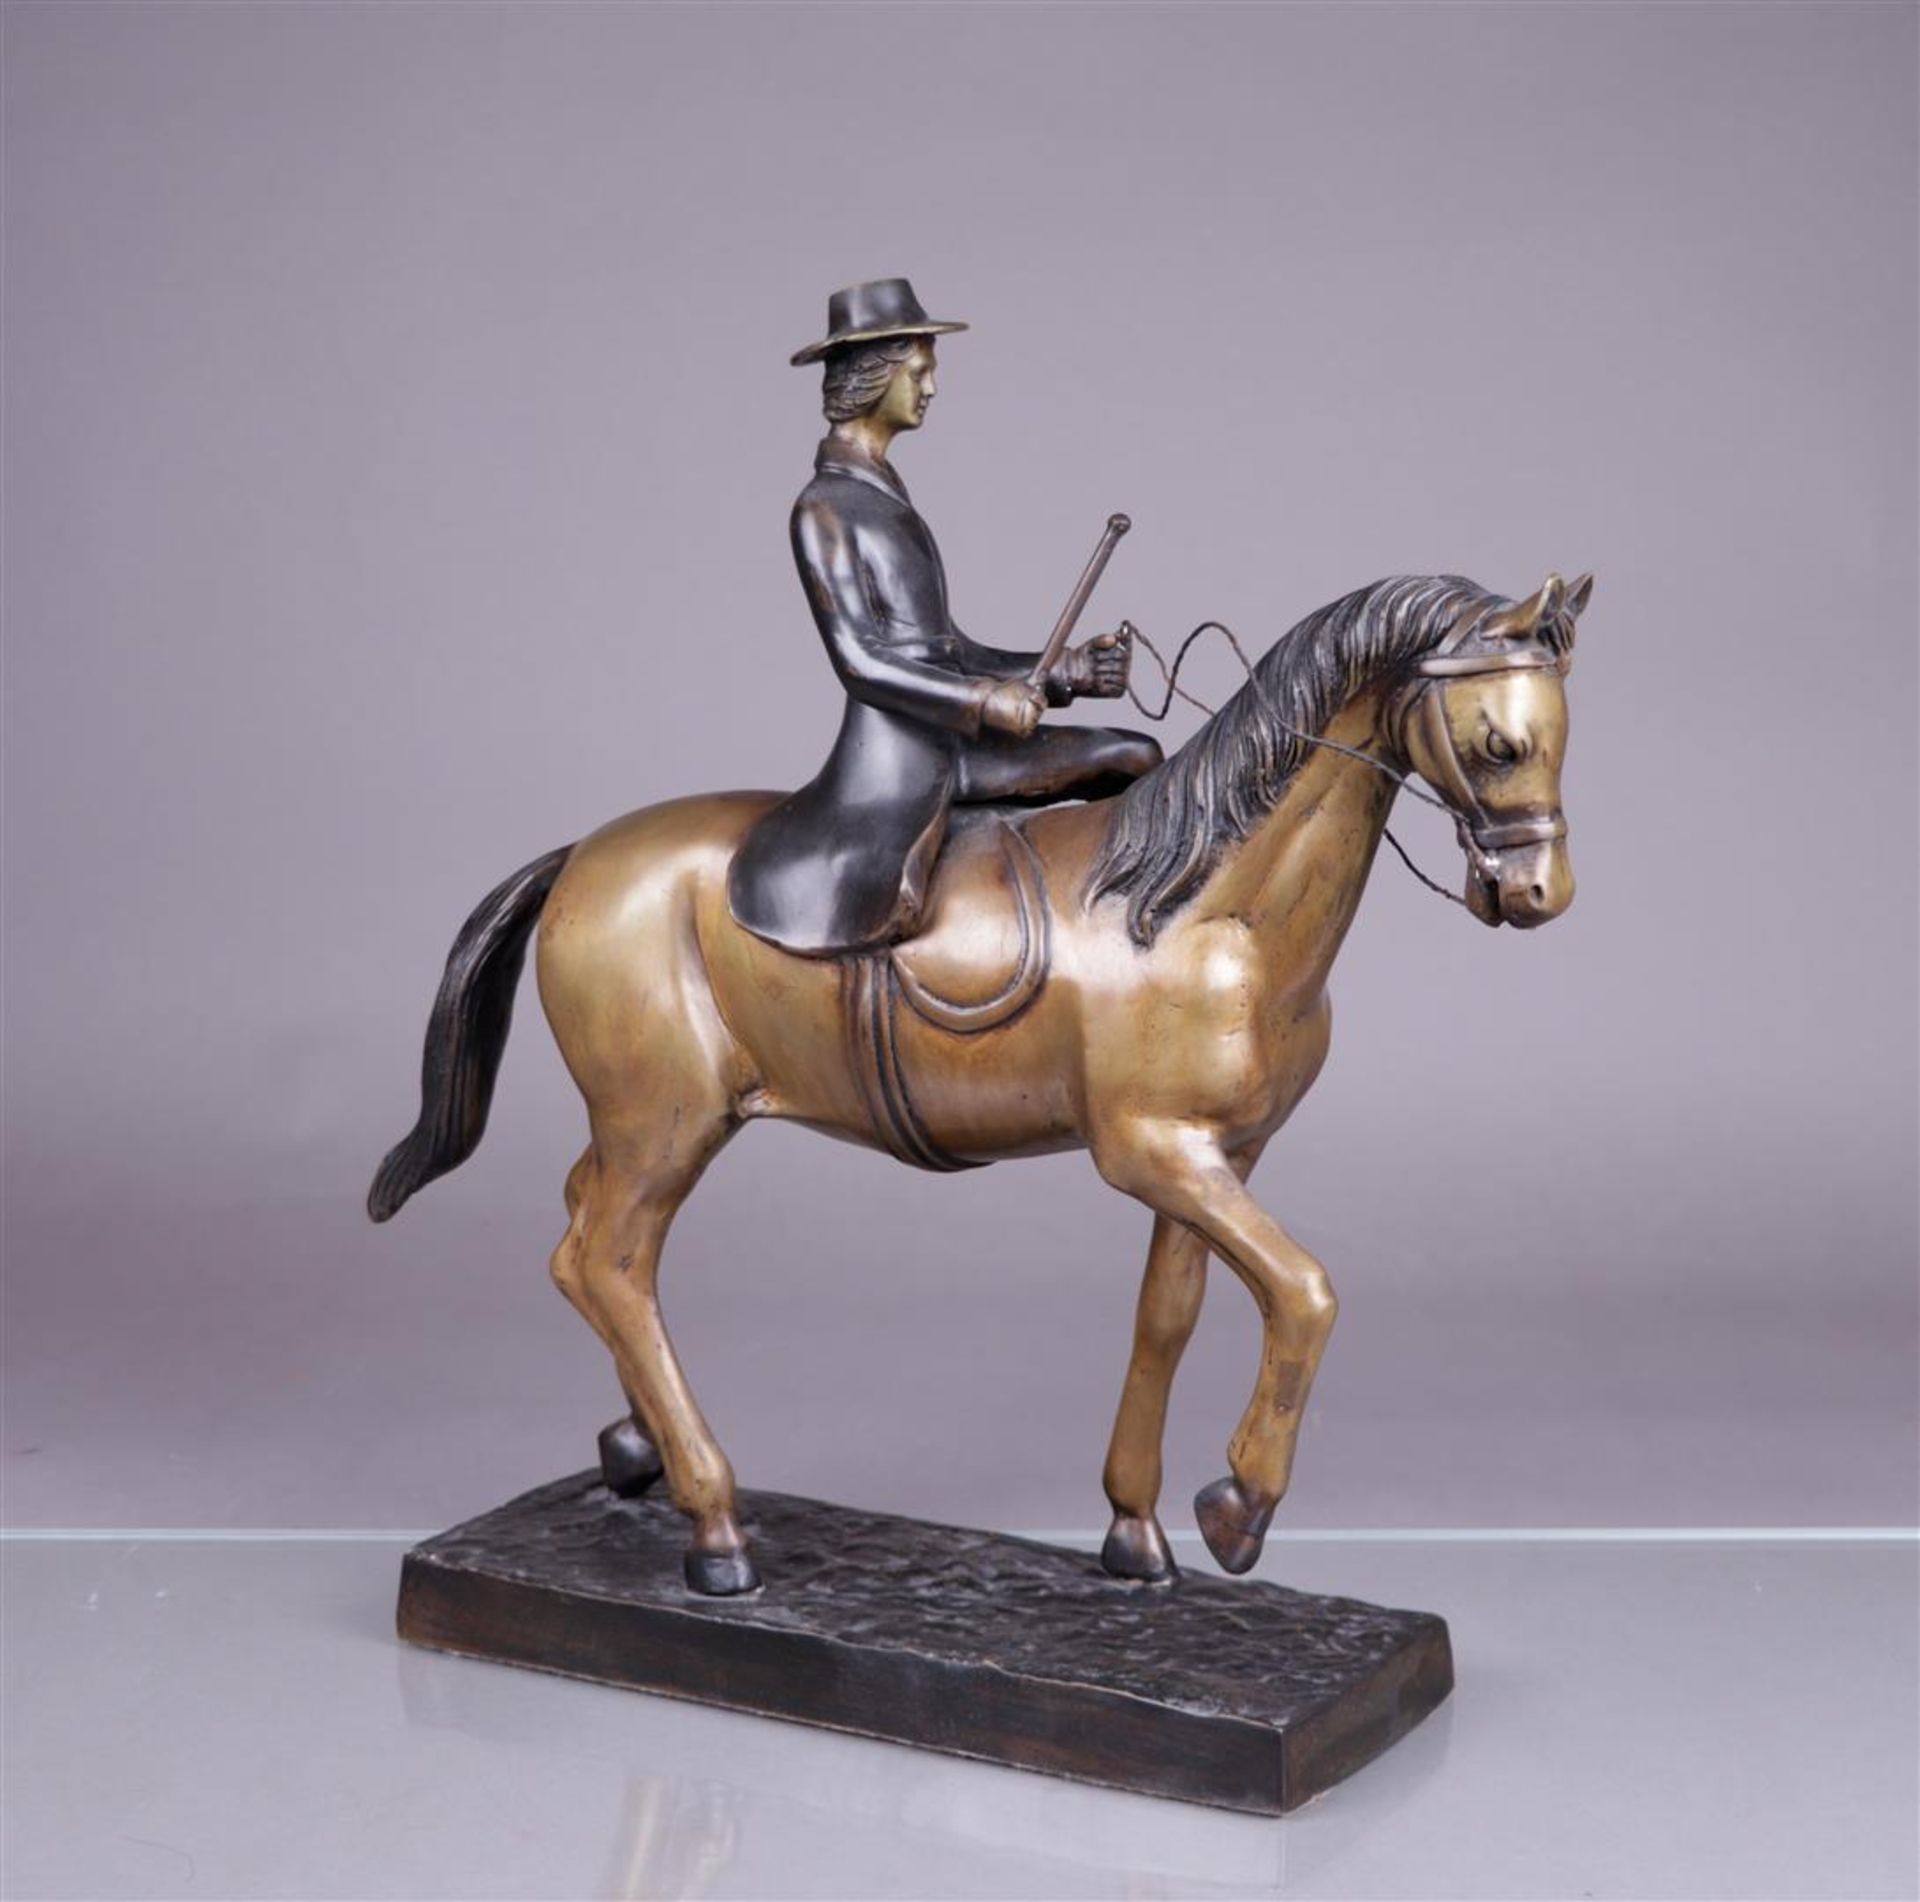 A bronze of an amazon on horseback, 20th century.
H.: 45 cm. - Image 2 of 3